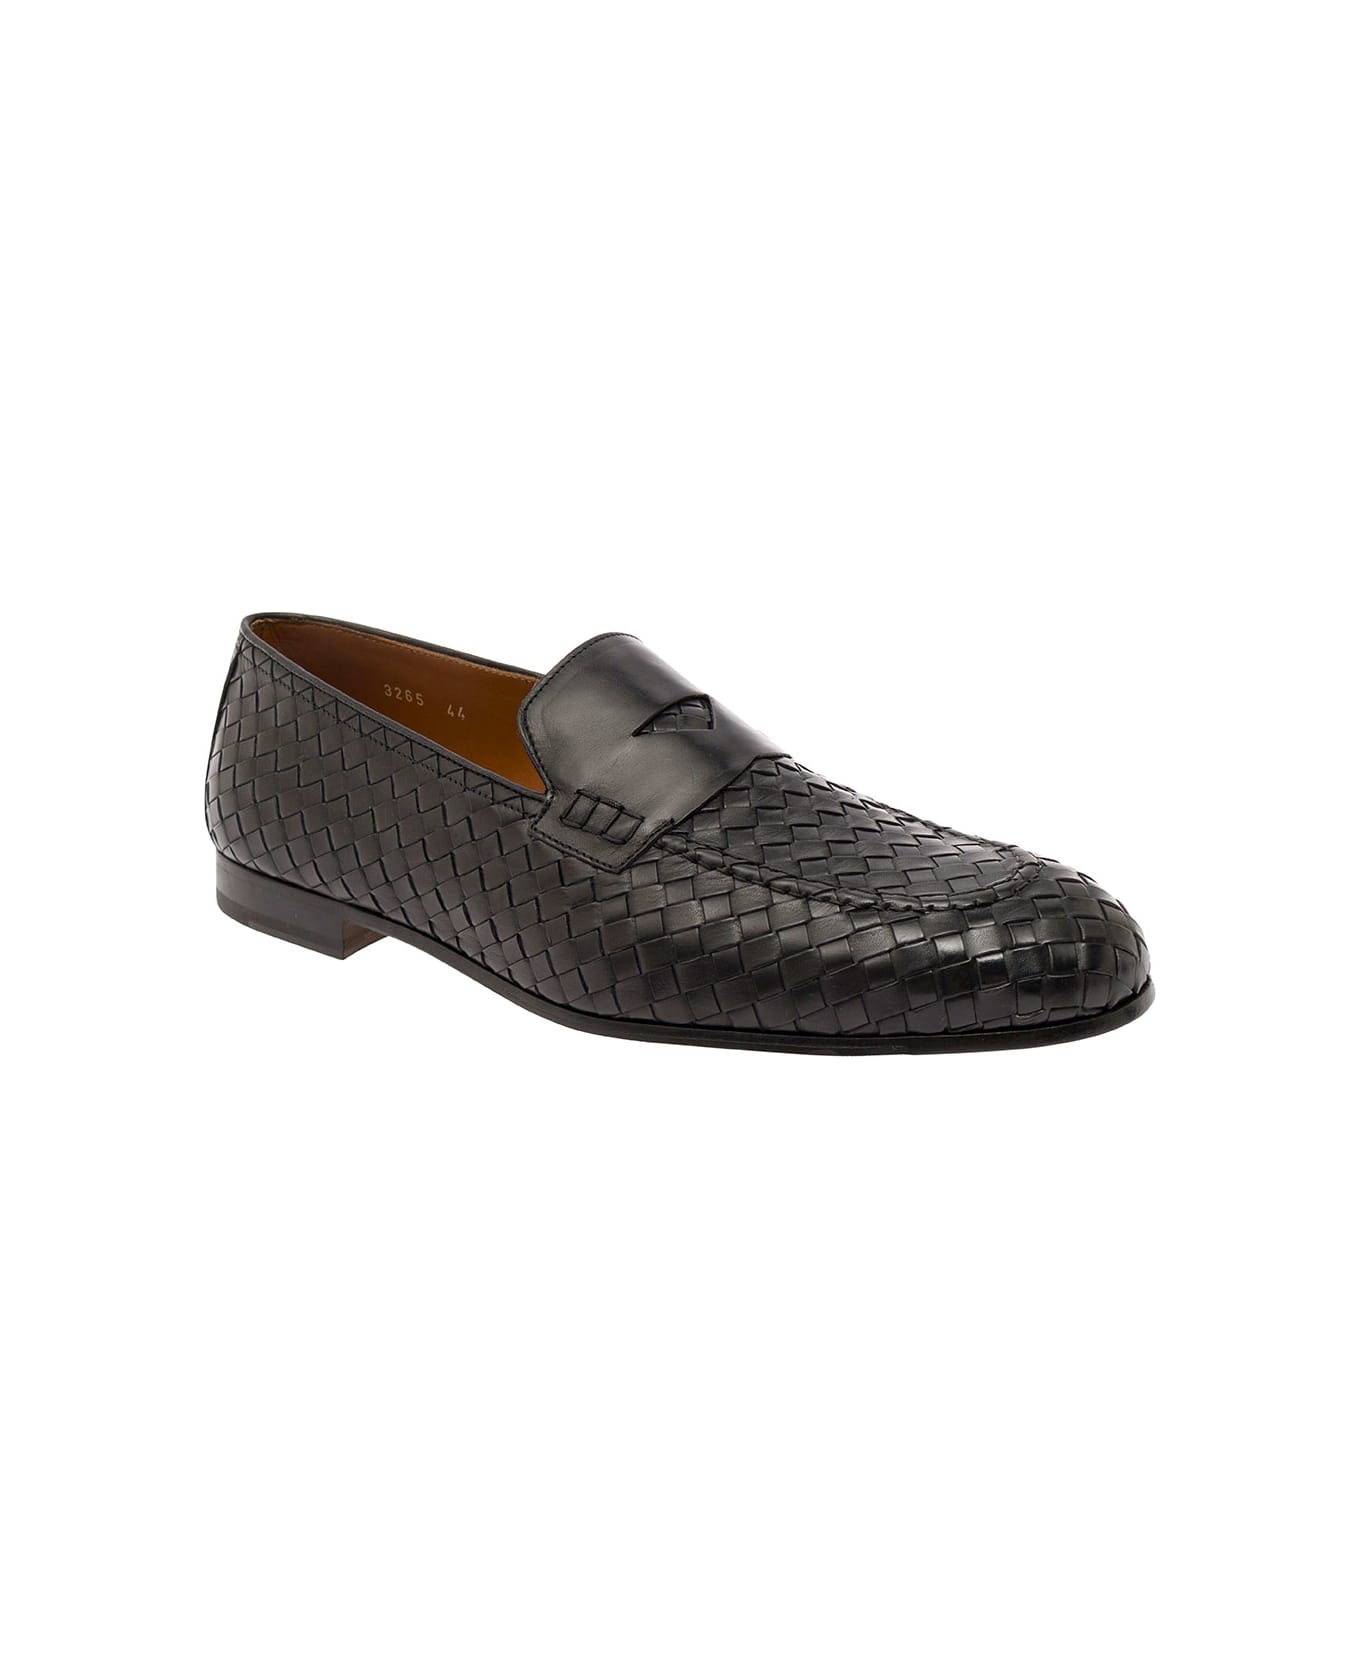 Doucal's Black Pull On Loafers In Woven Leather Man - Black ローファー＆デッキシューズ